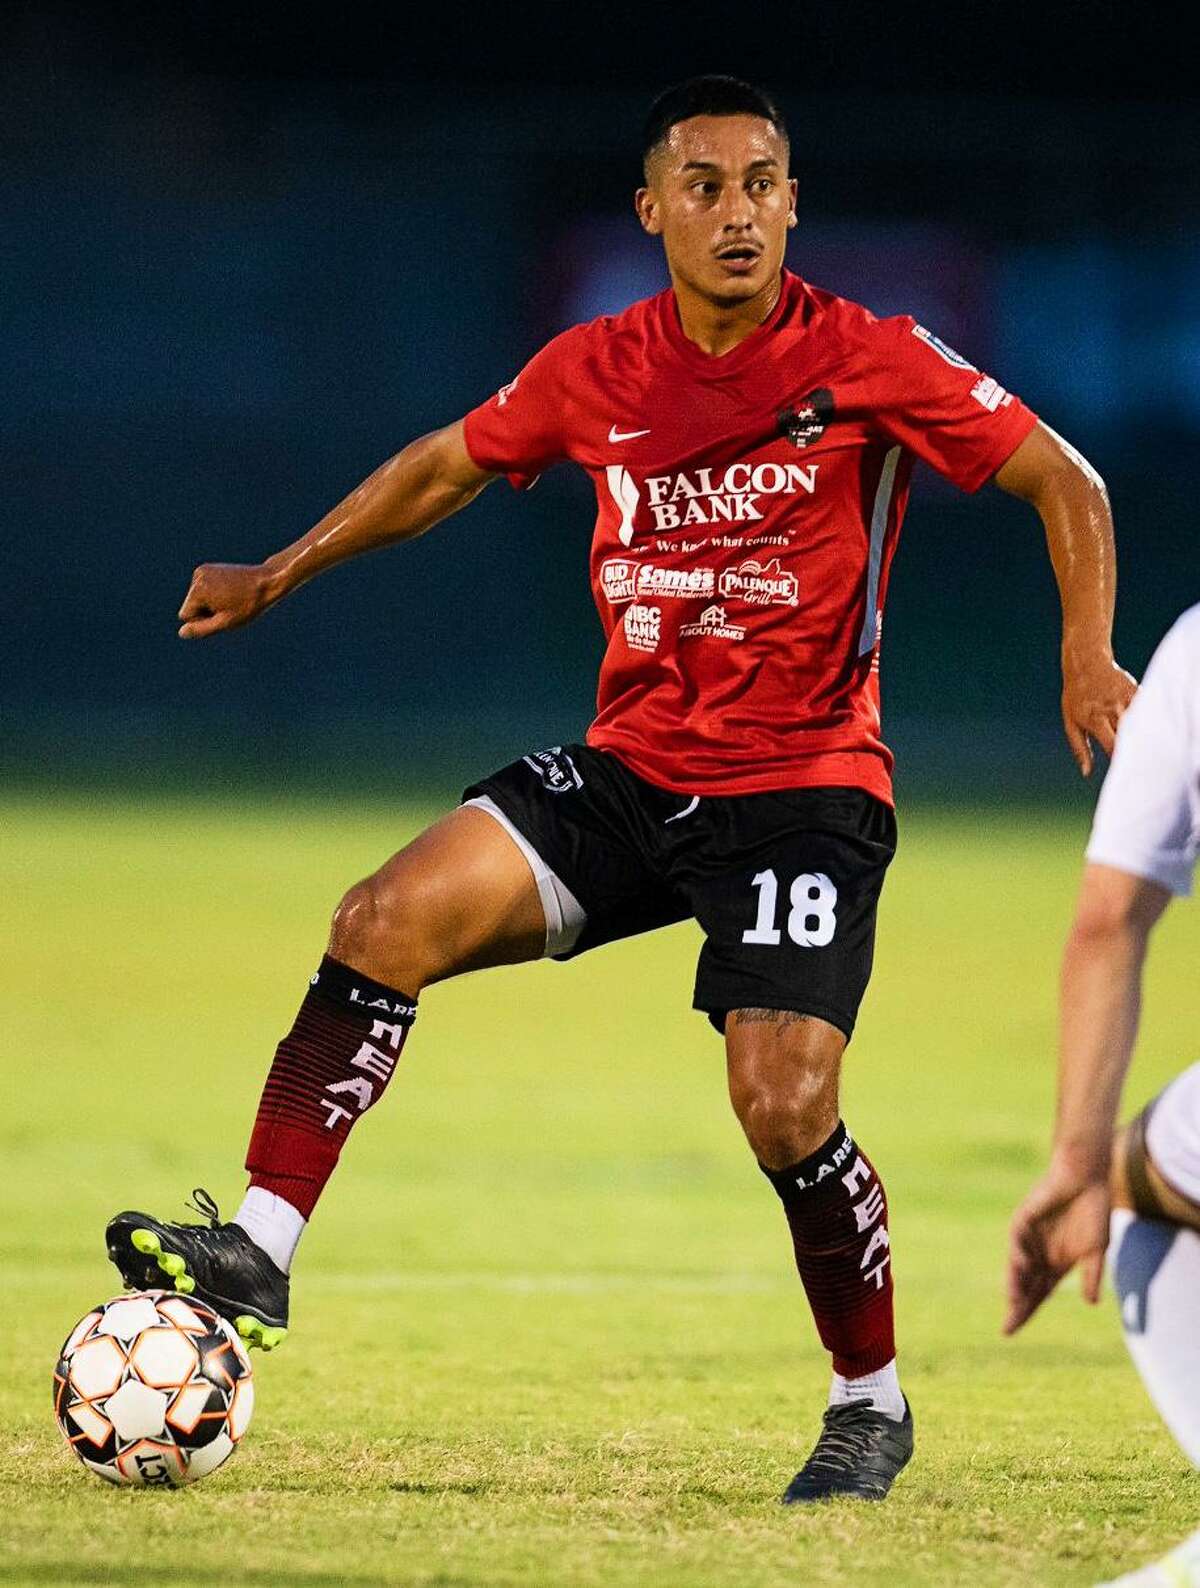 Laredo returns a few familiar faces from last year’s squad, including a trio of returning starters in defenders Liam Morrison and Lewis Wilson and midfielder Oscar Govea (pictured).